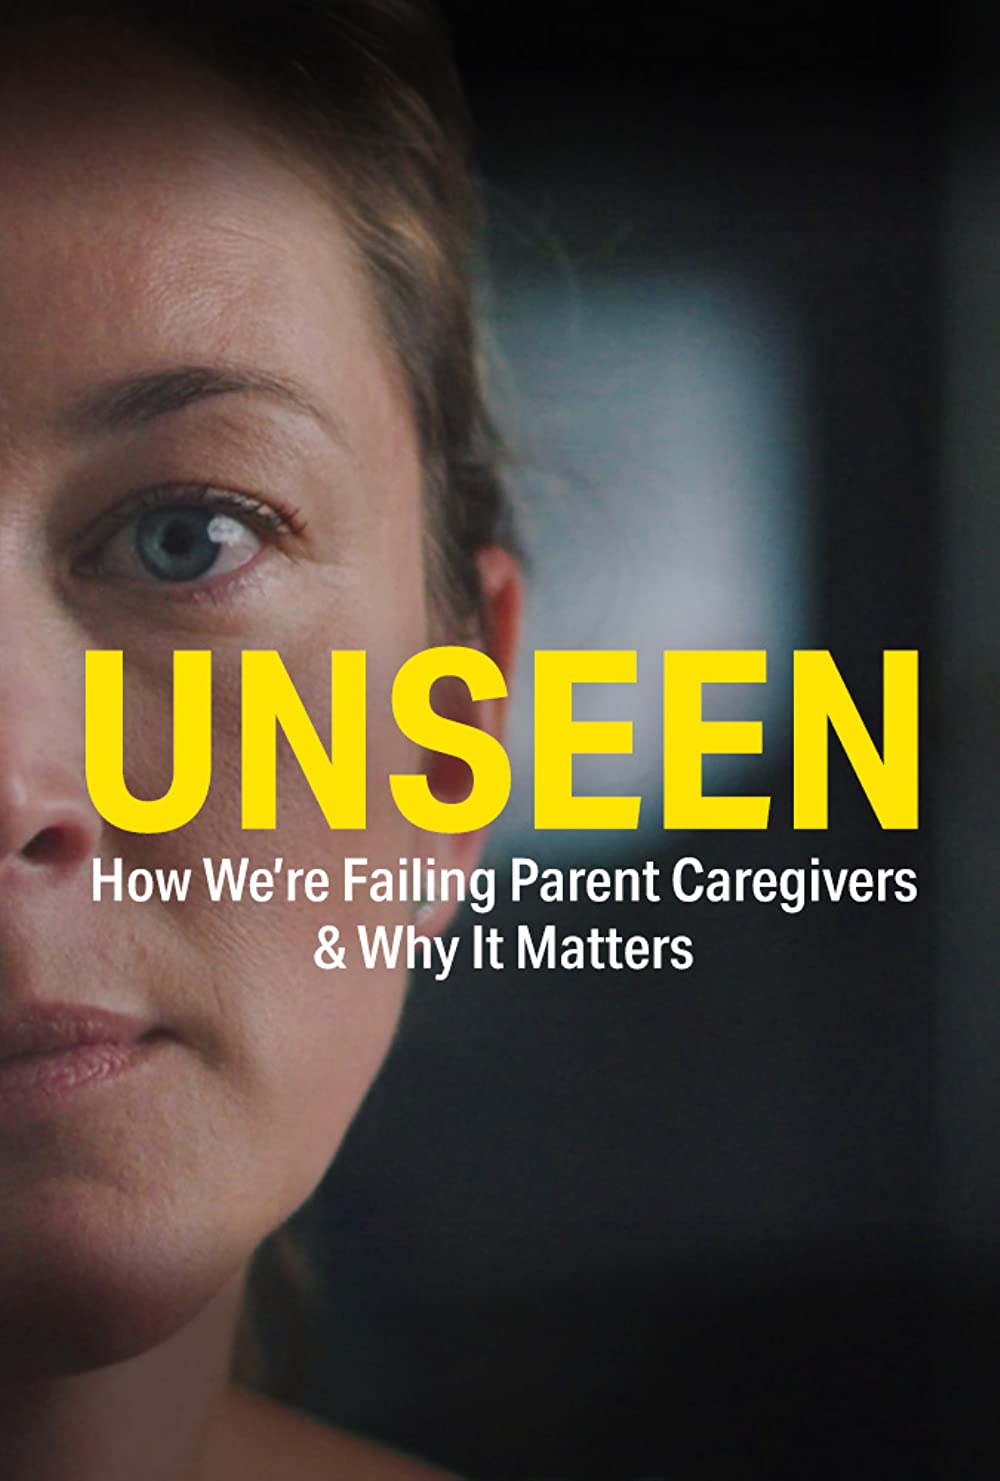 Unseen: How We're Failing Parent Caregivers & Why It Matters